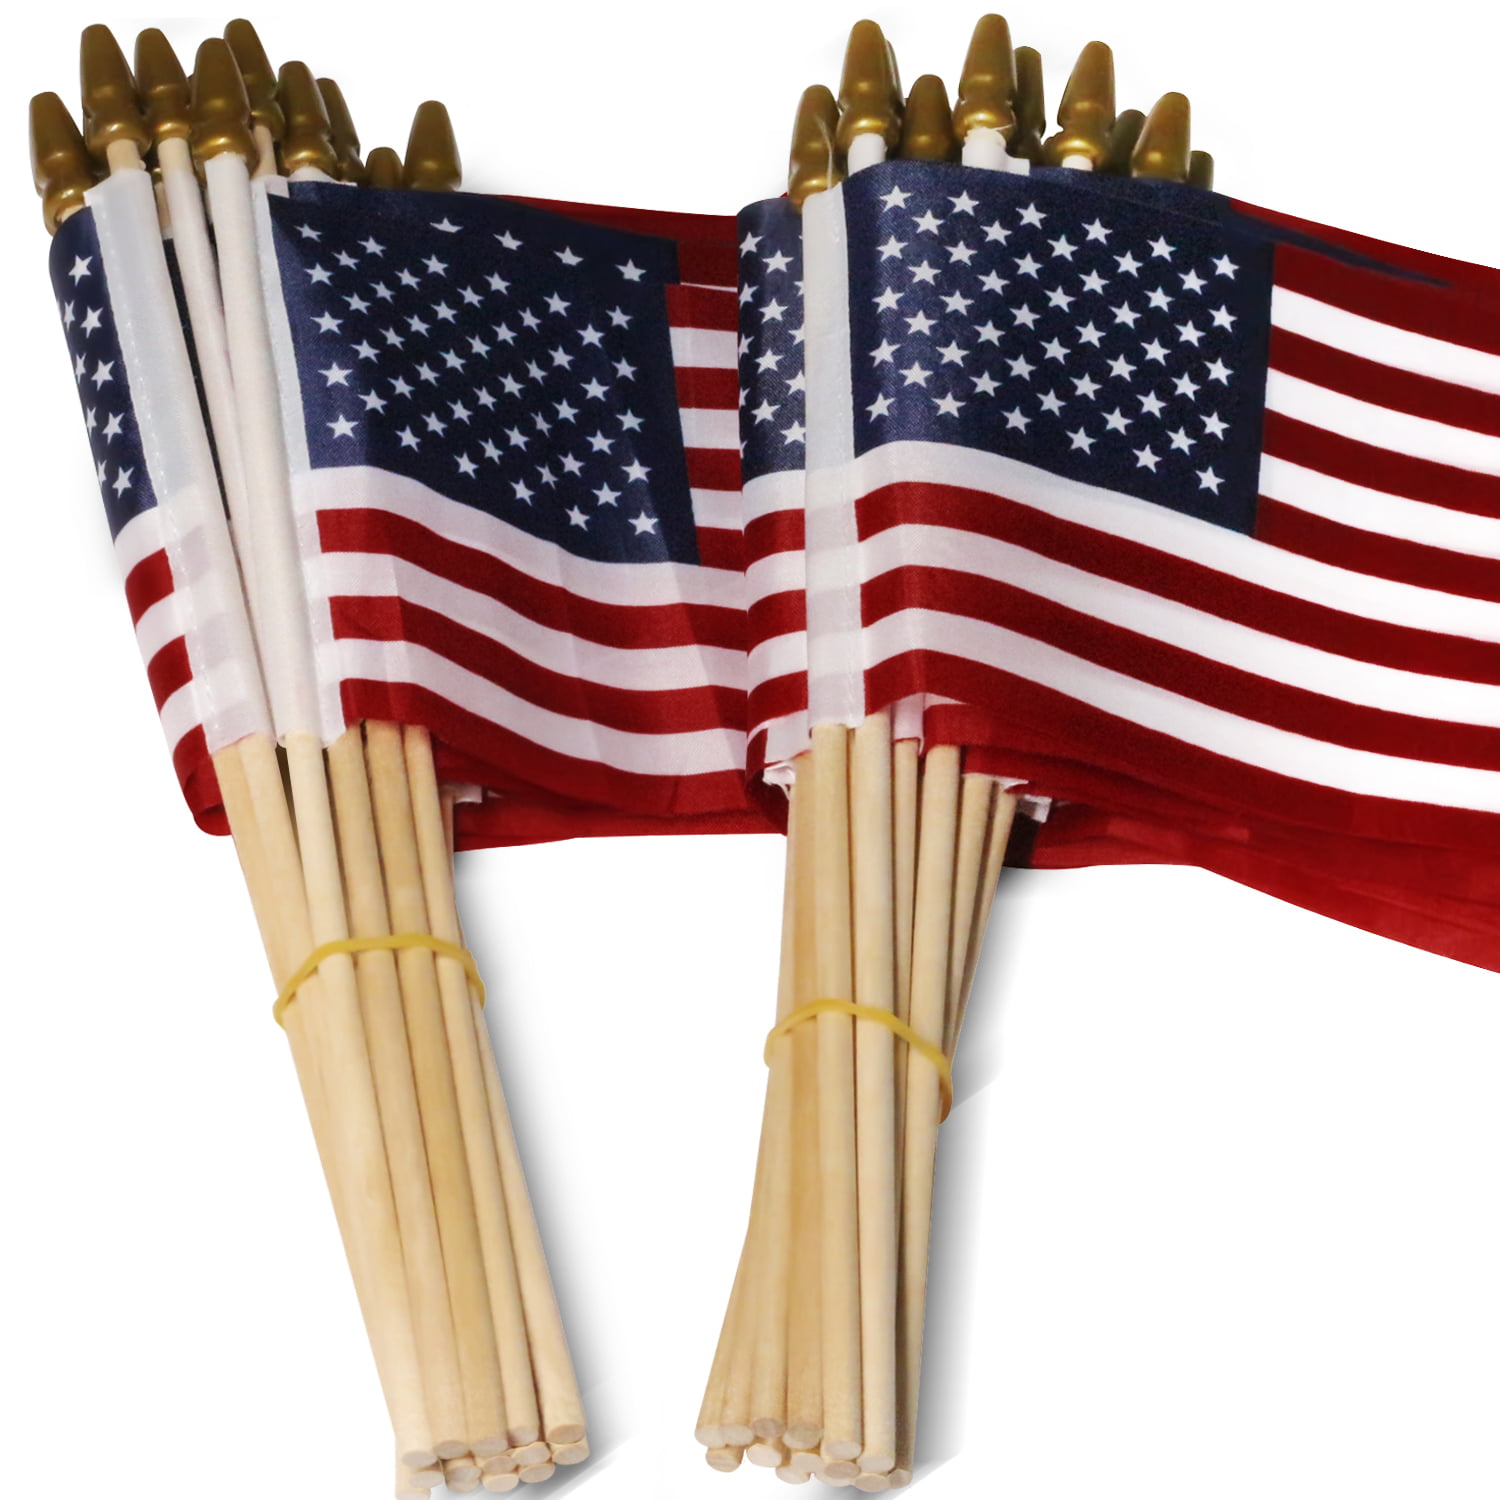 12 USA Country 12" x 8" Inch Flags On Wooden Sticks...New 